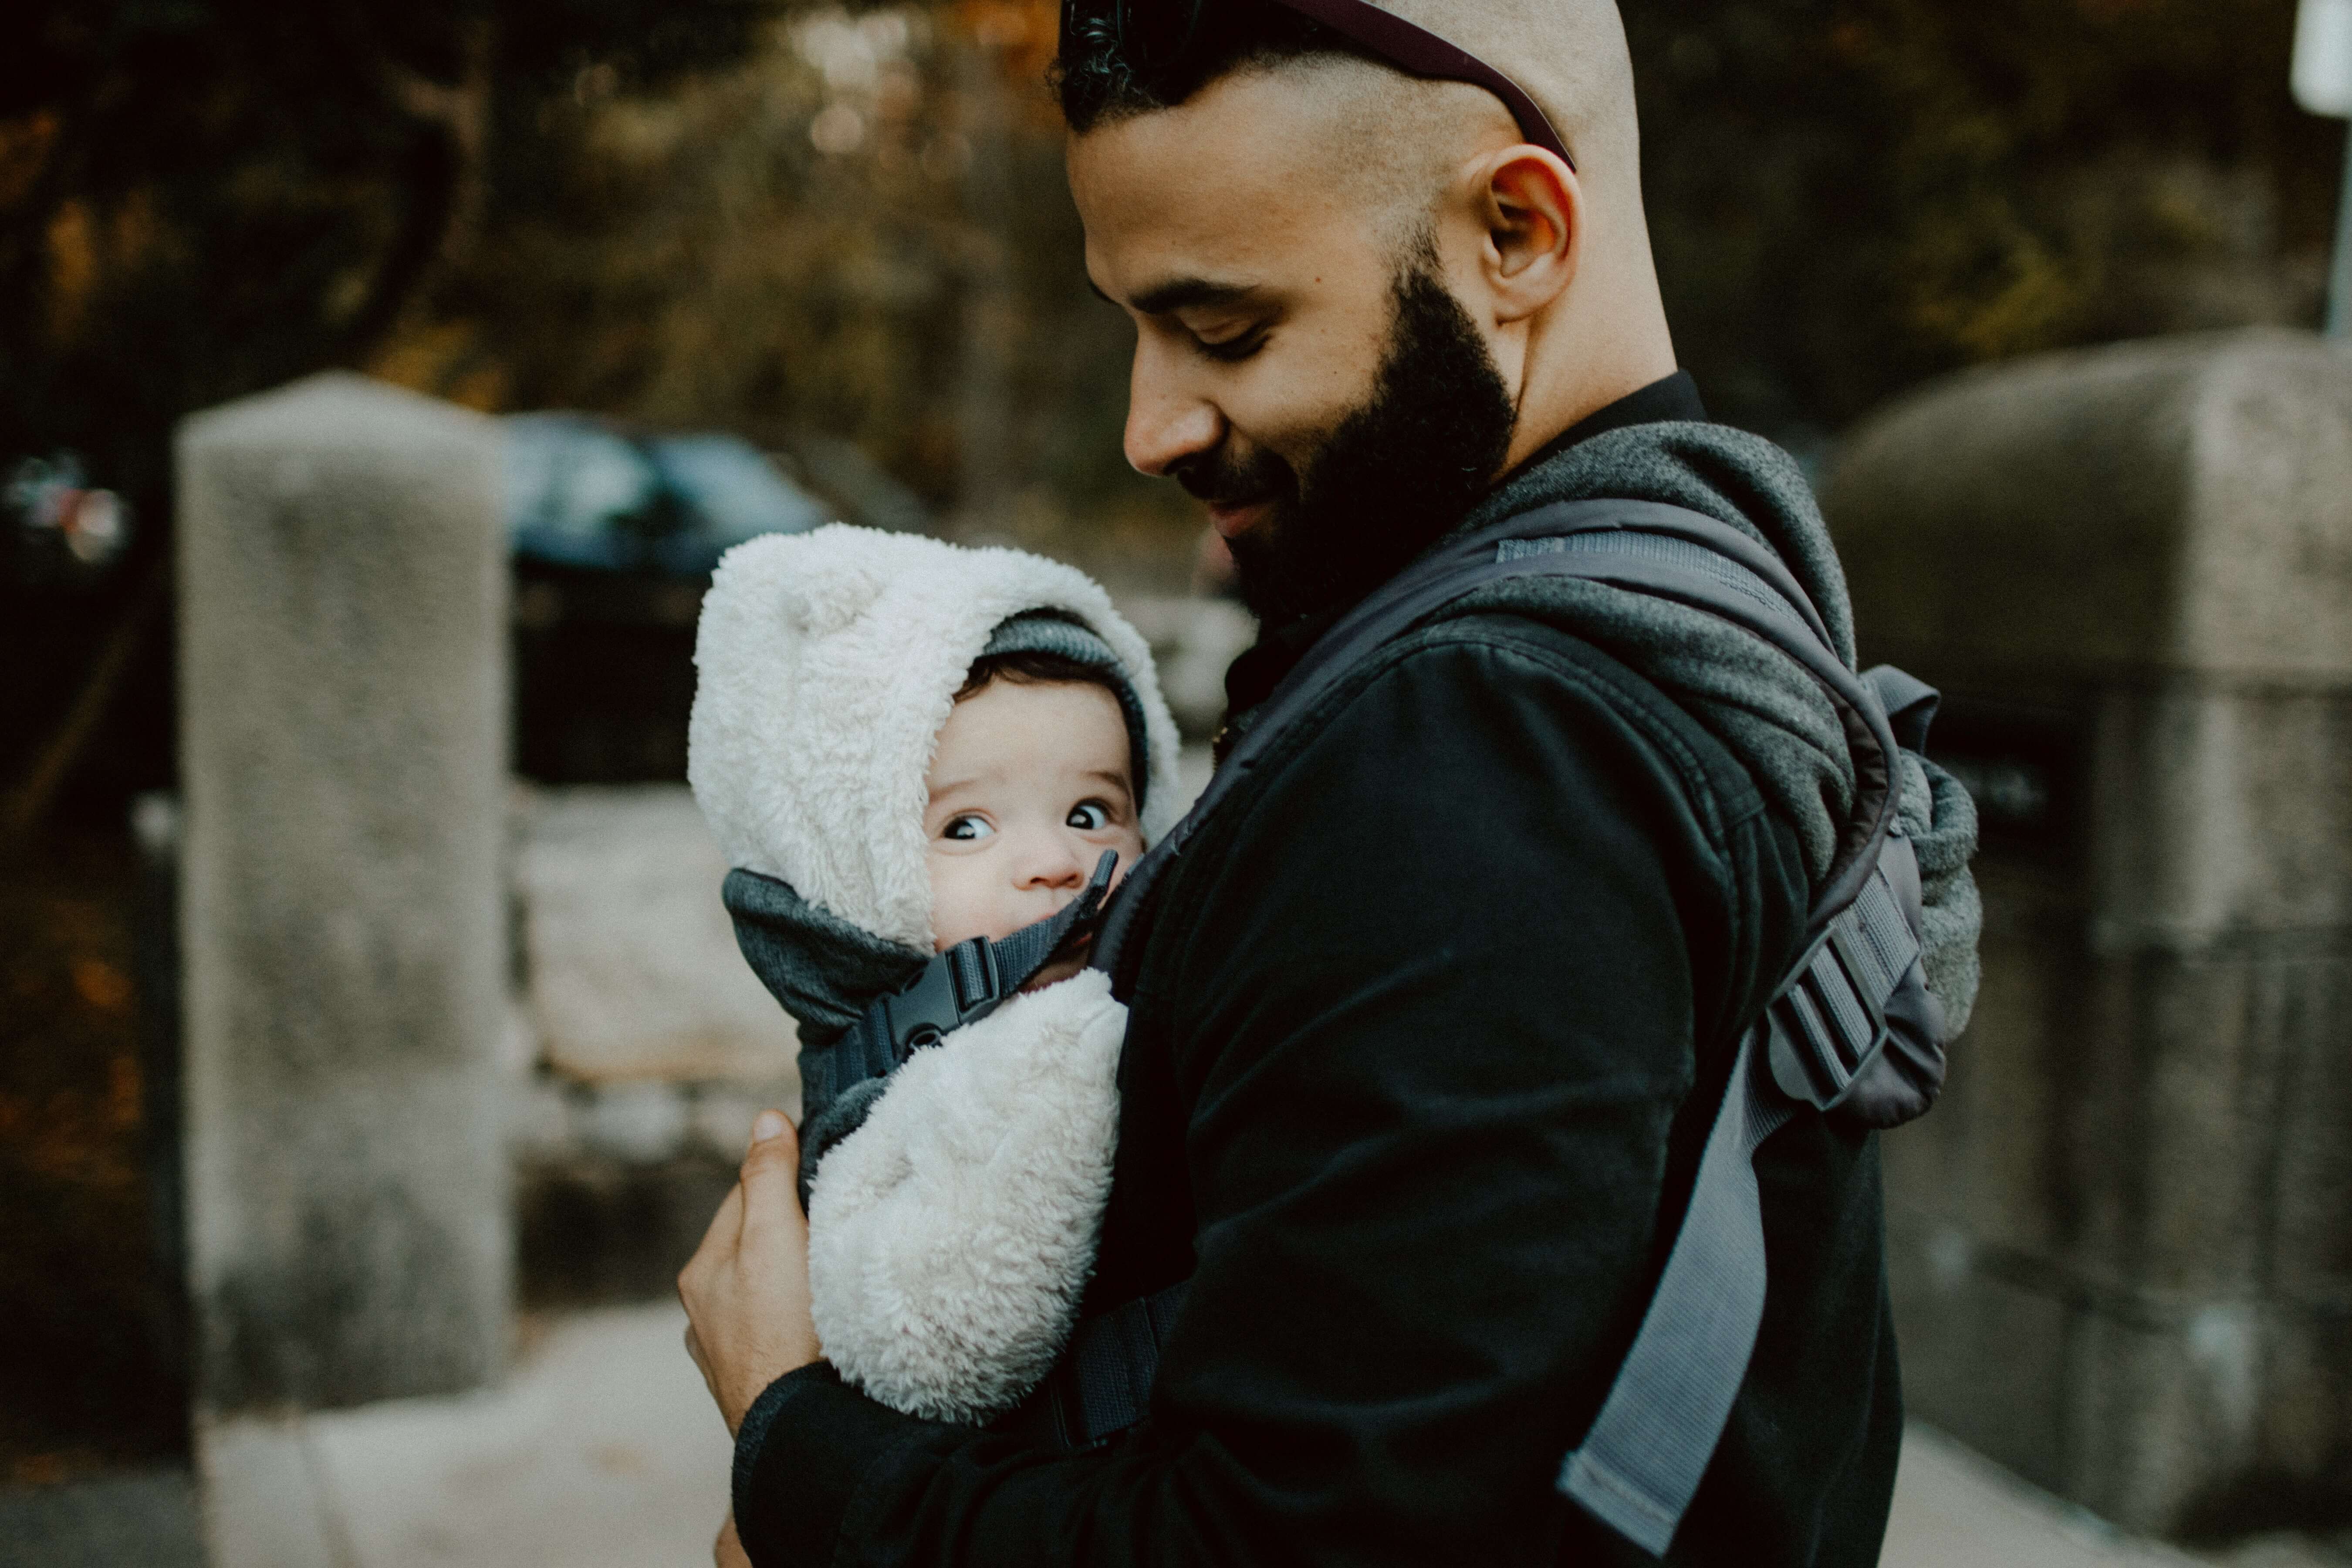 A middle eastern man holds a baby in a fluffy jacket in a front-carrying baby carrier.